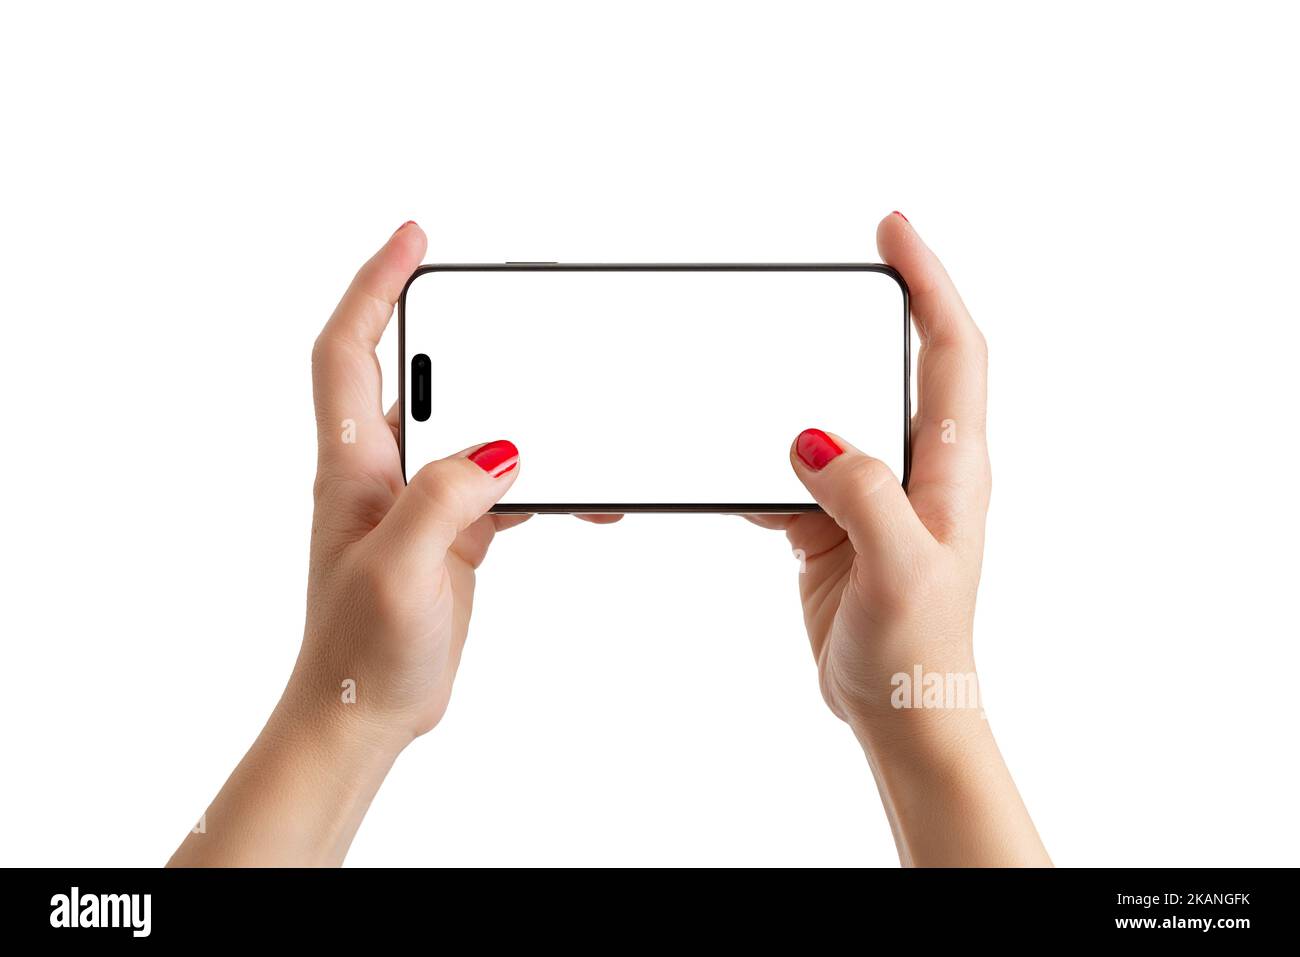 Woman hands holding phone in horizontal position. Isolated screen for playing games mobile mockup Stock Photo